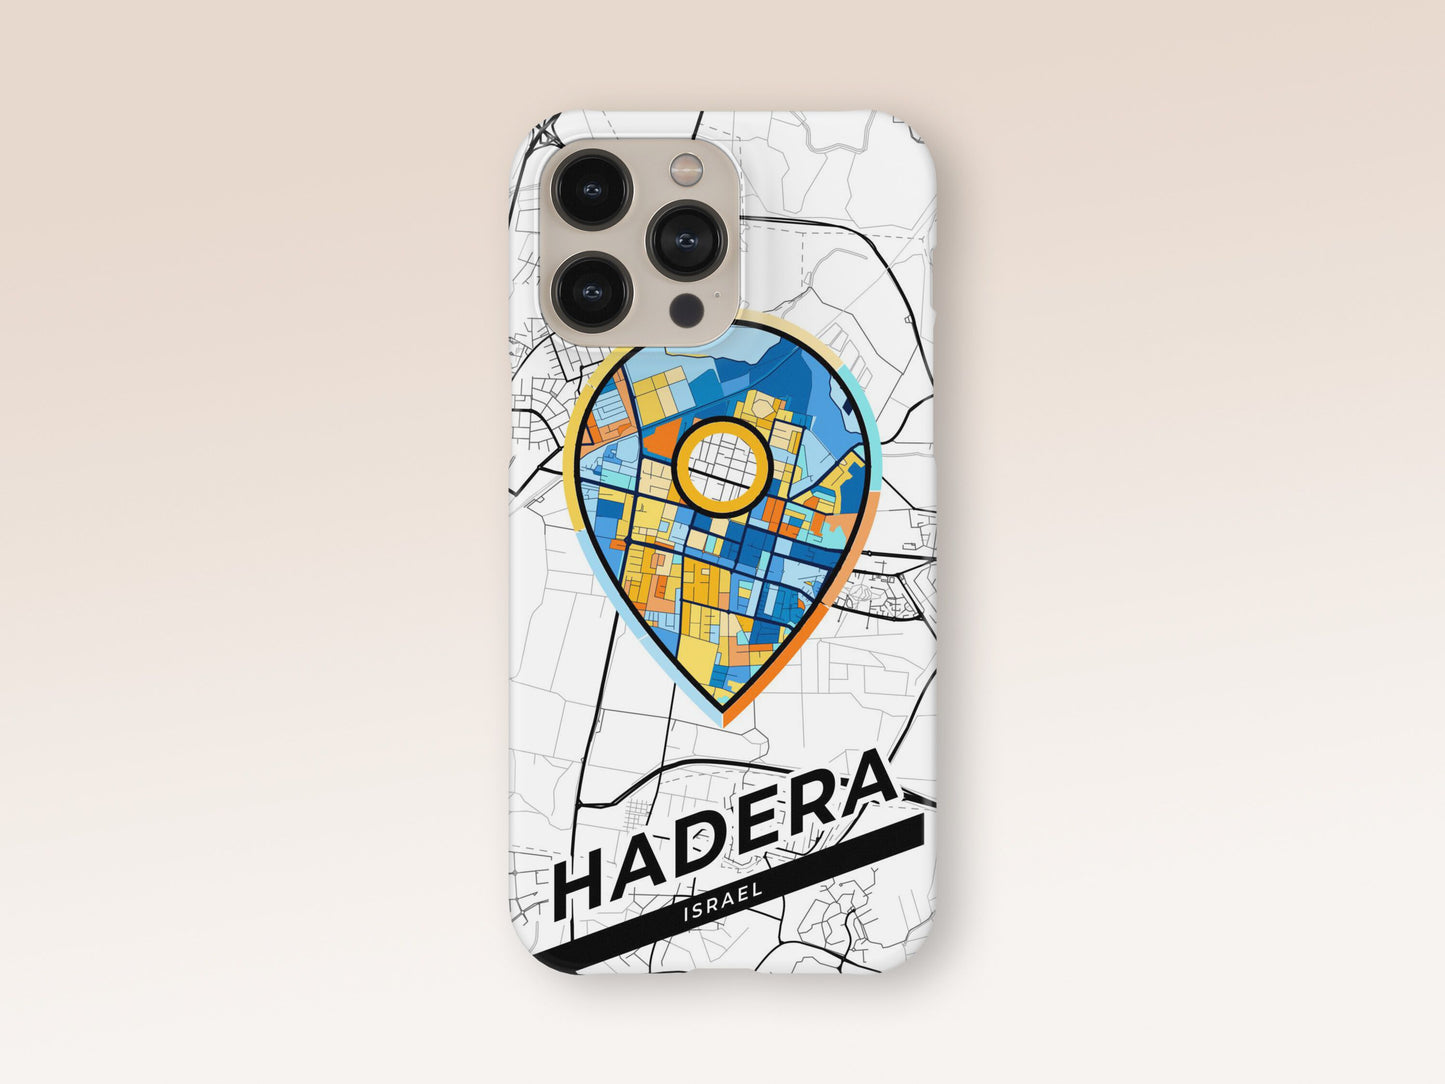 Hadera Israel slim phone case with colorful icon. Birthday, wedding or housewarming gift. Couple match cases. 1